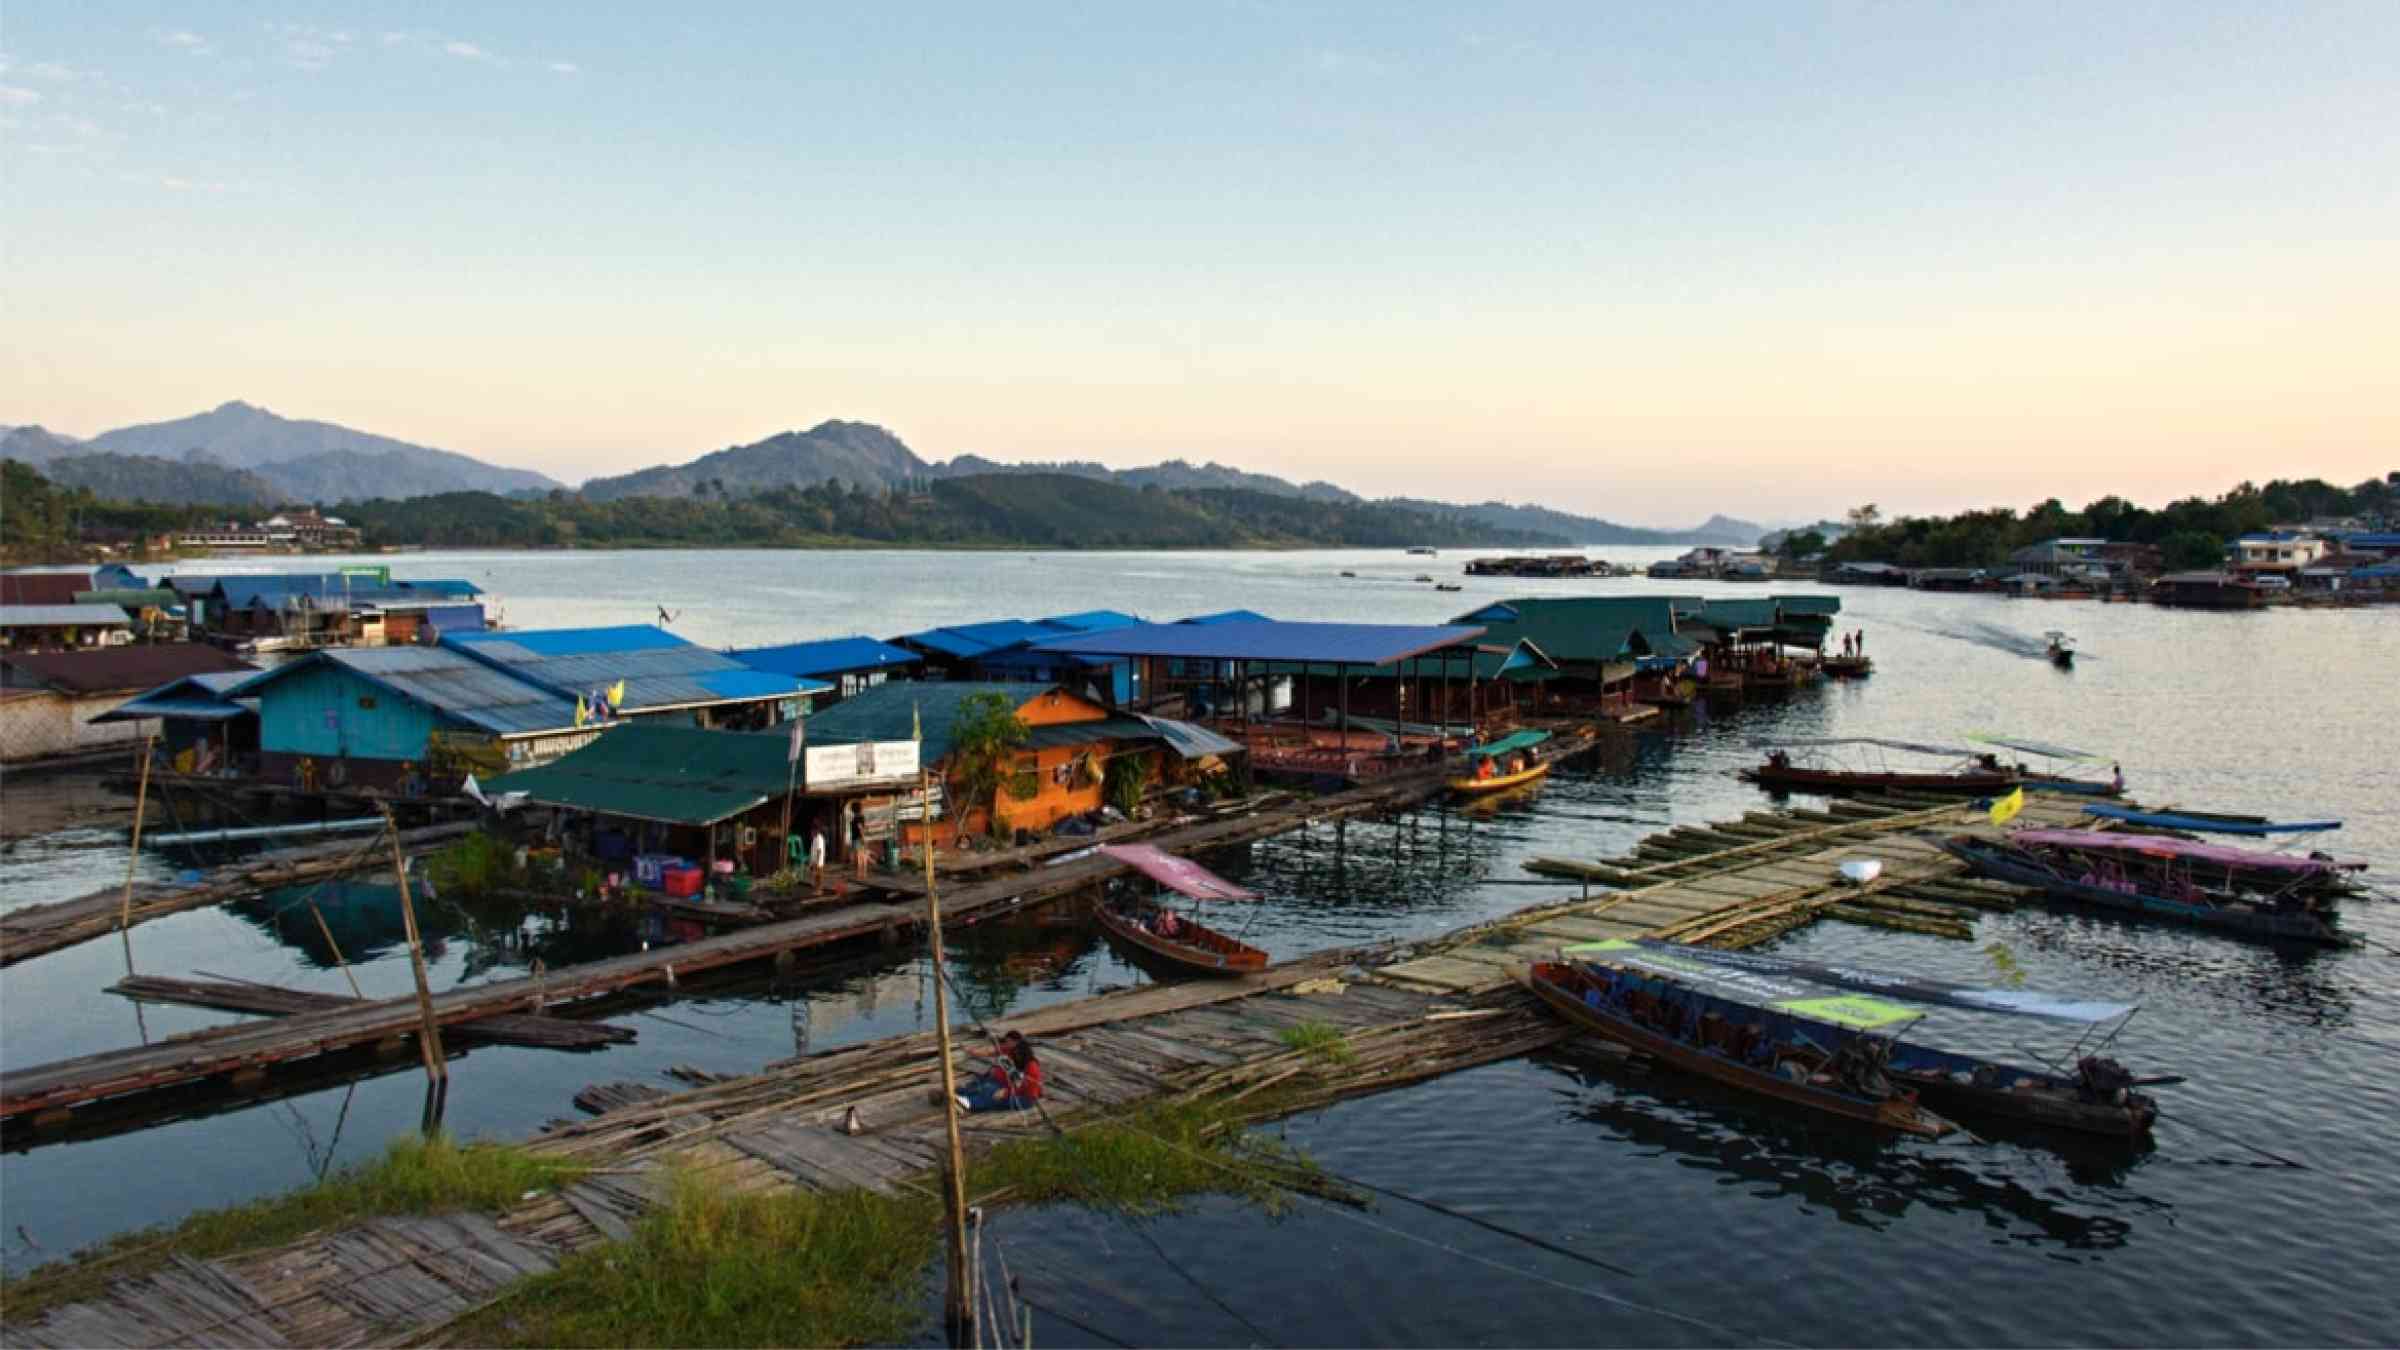 The waterfront of Mon village (Wang Kha) and floating rafts in Thailand